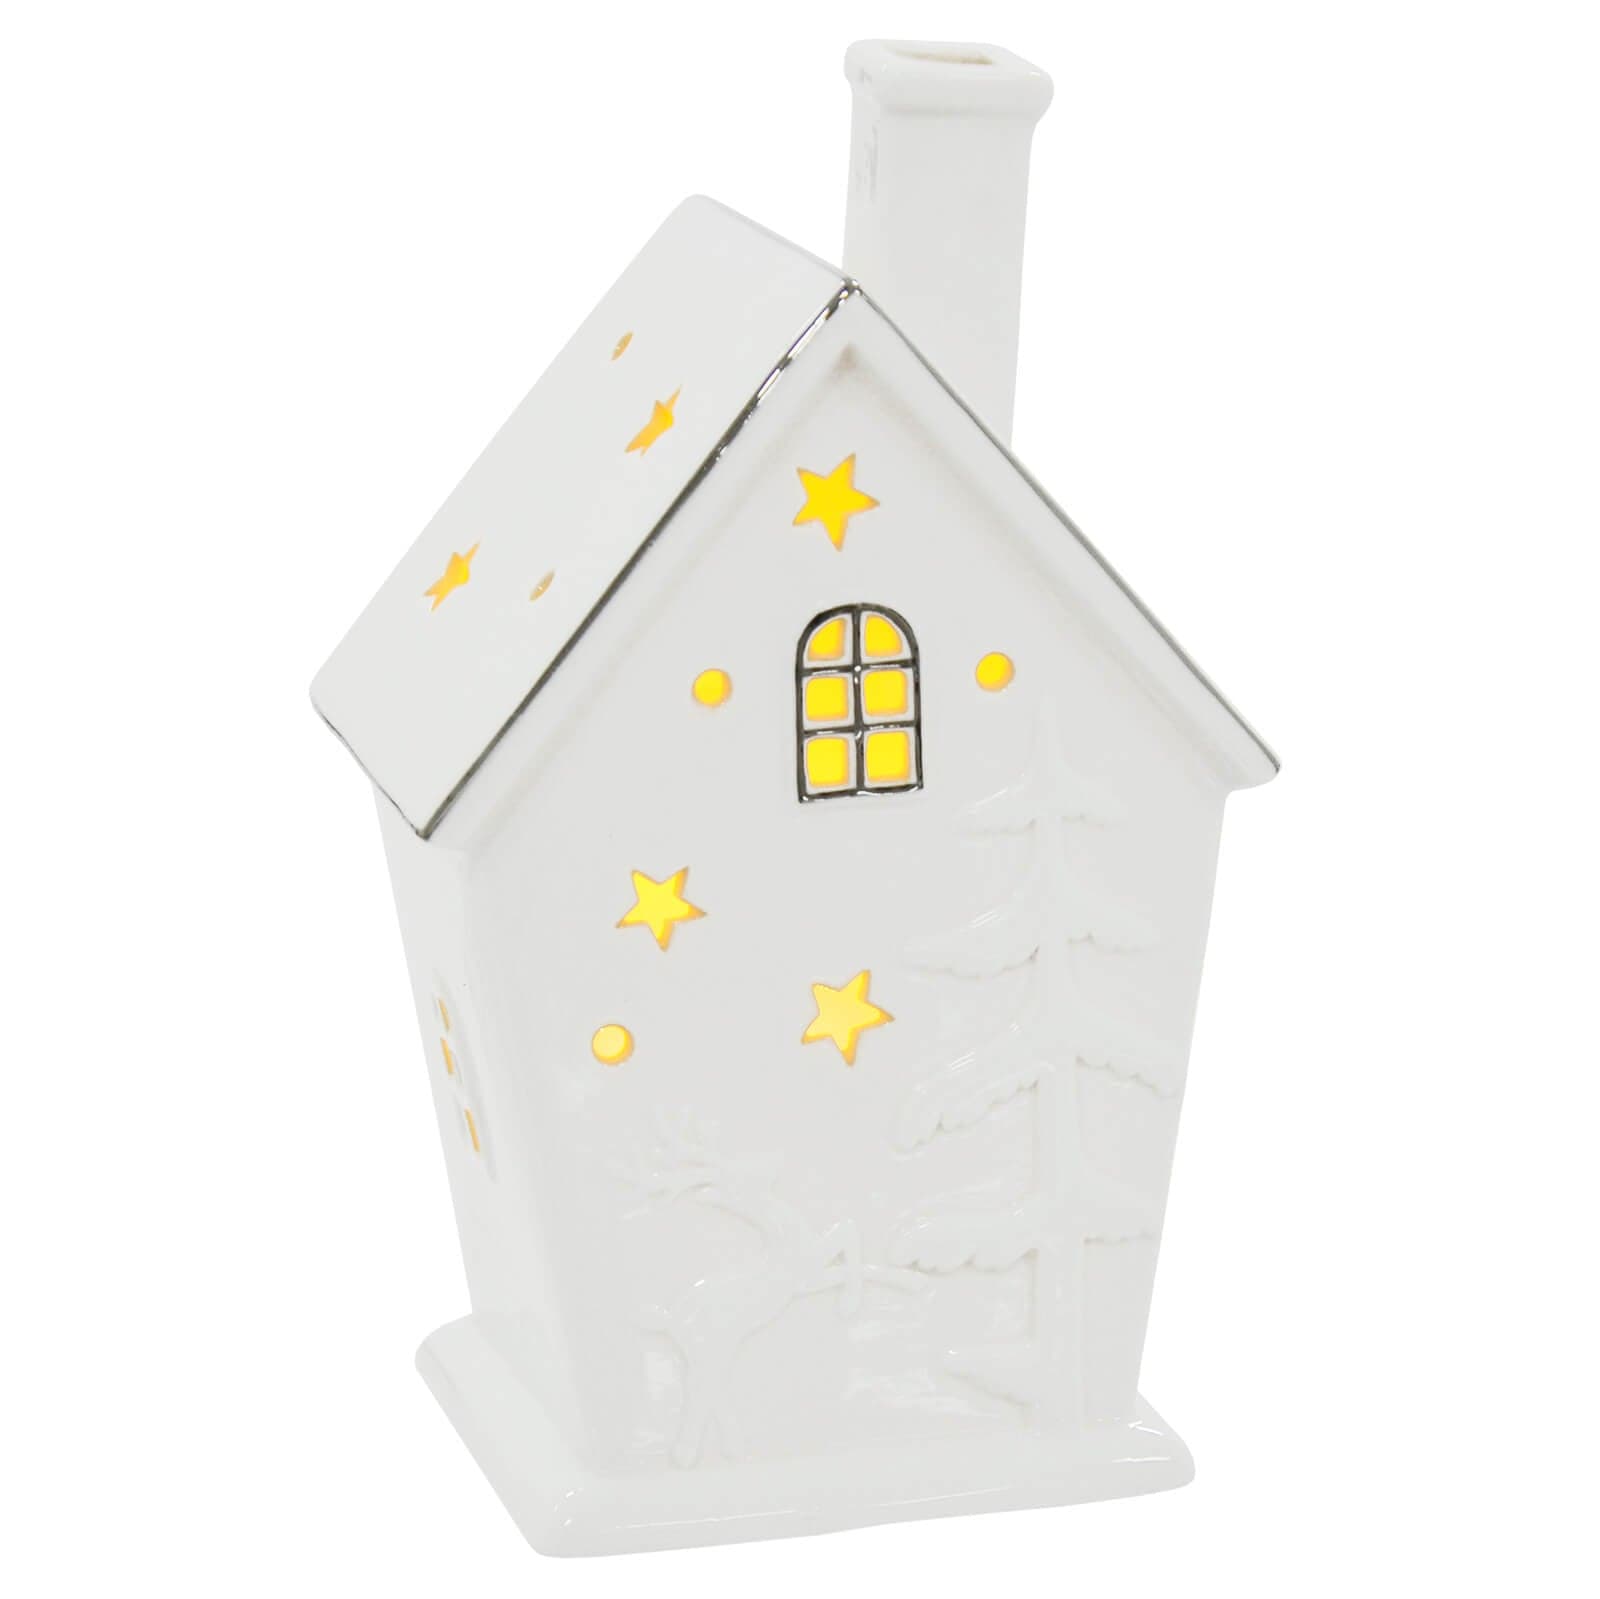 Light up house with warm white LED light shining through a window and cut away stars, with silver edging and reindeer and tree detail